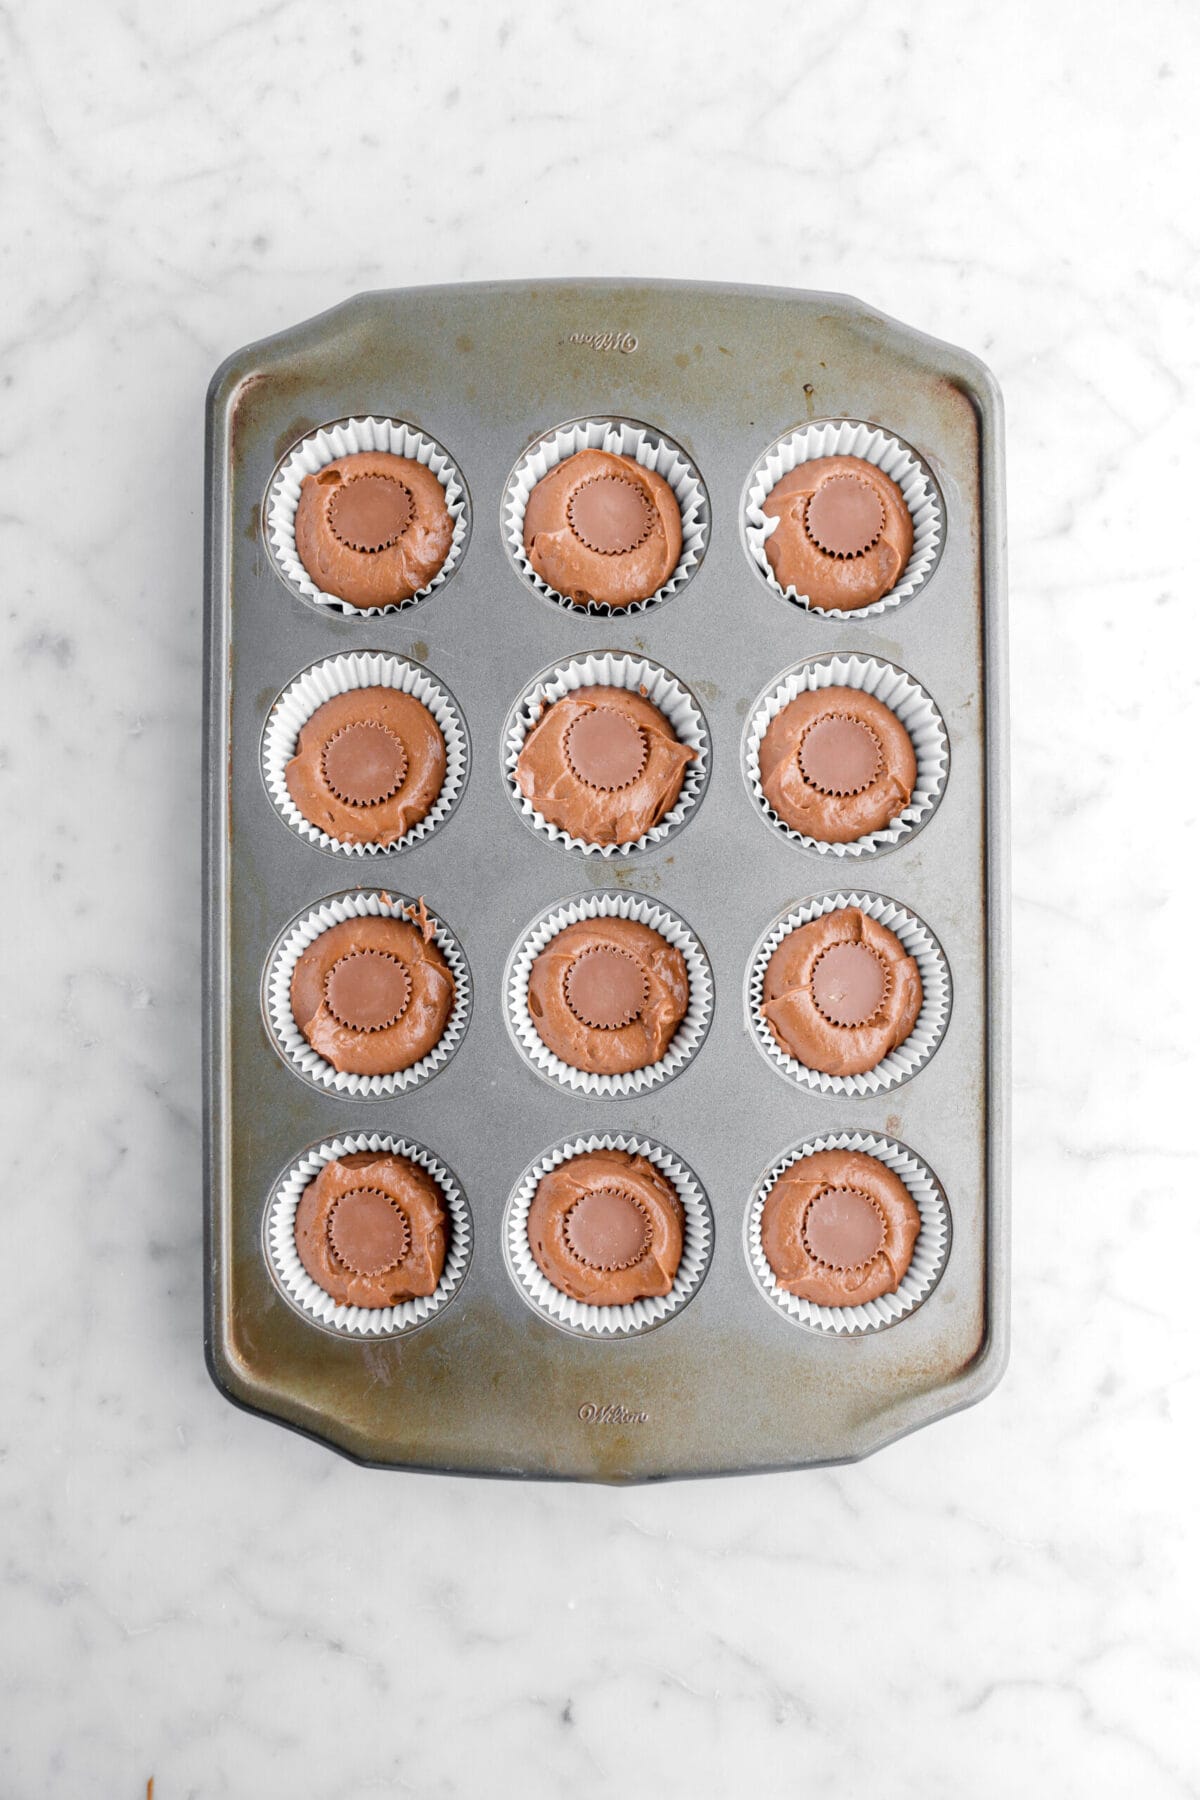 cupcake batter in muffin pan with mini peanut butter cup in the middle of each.